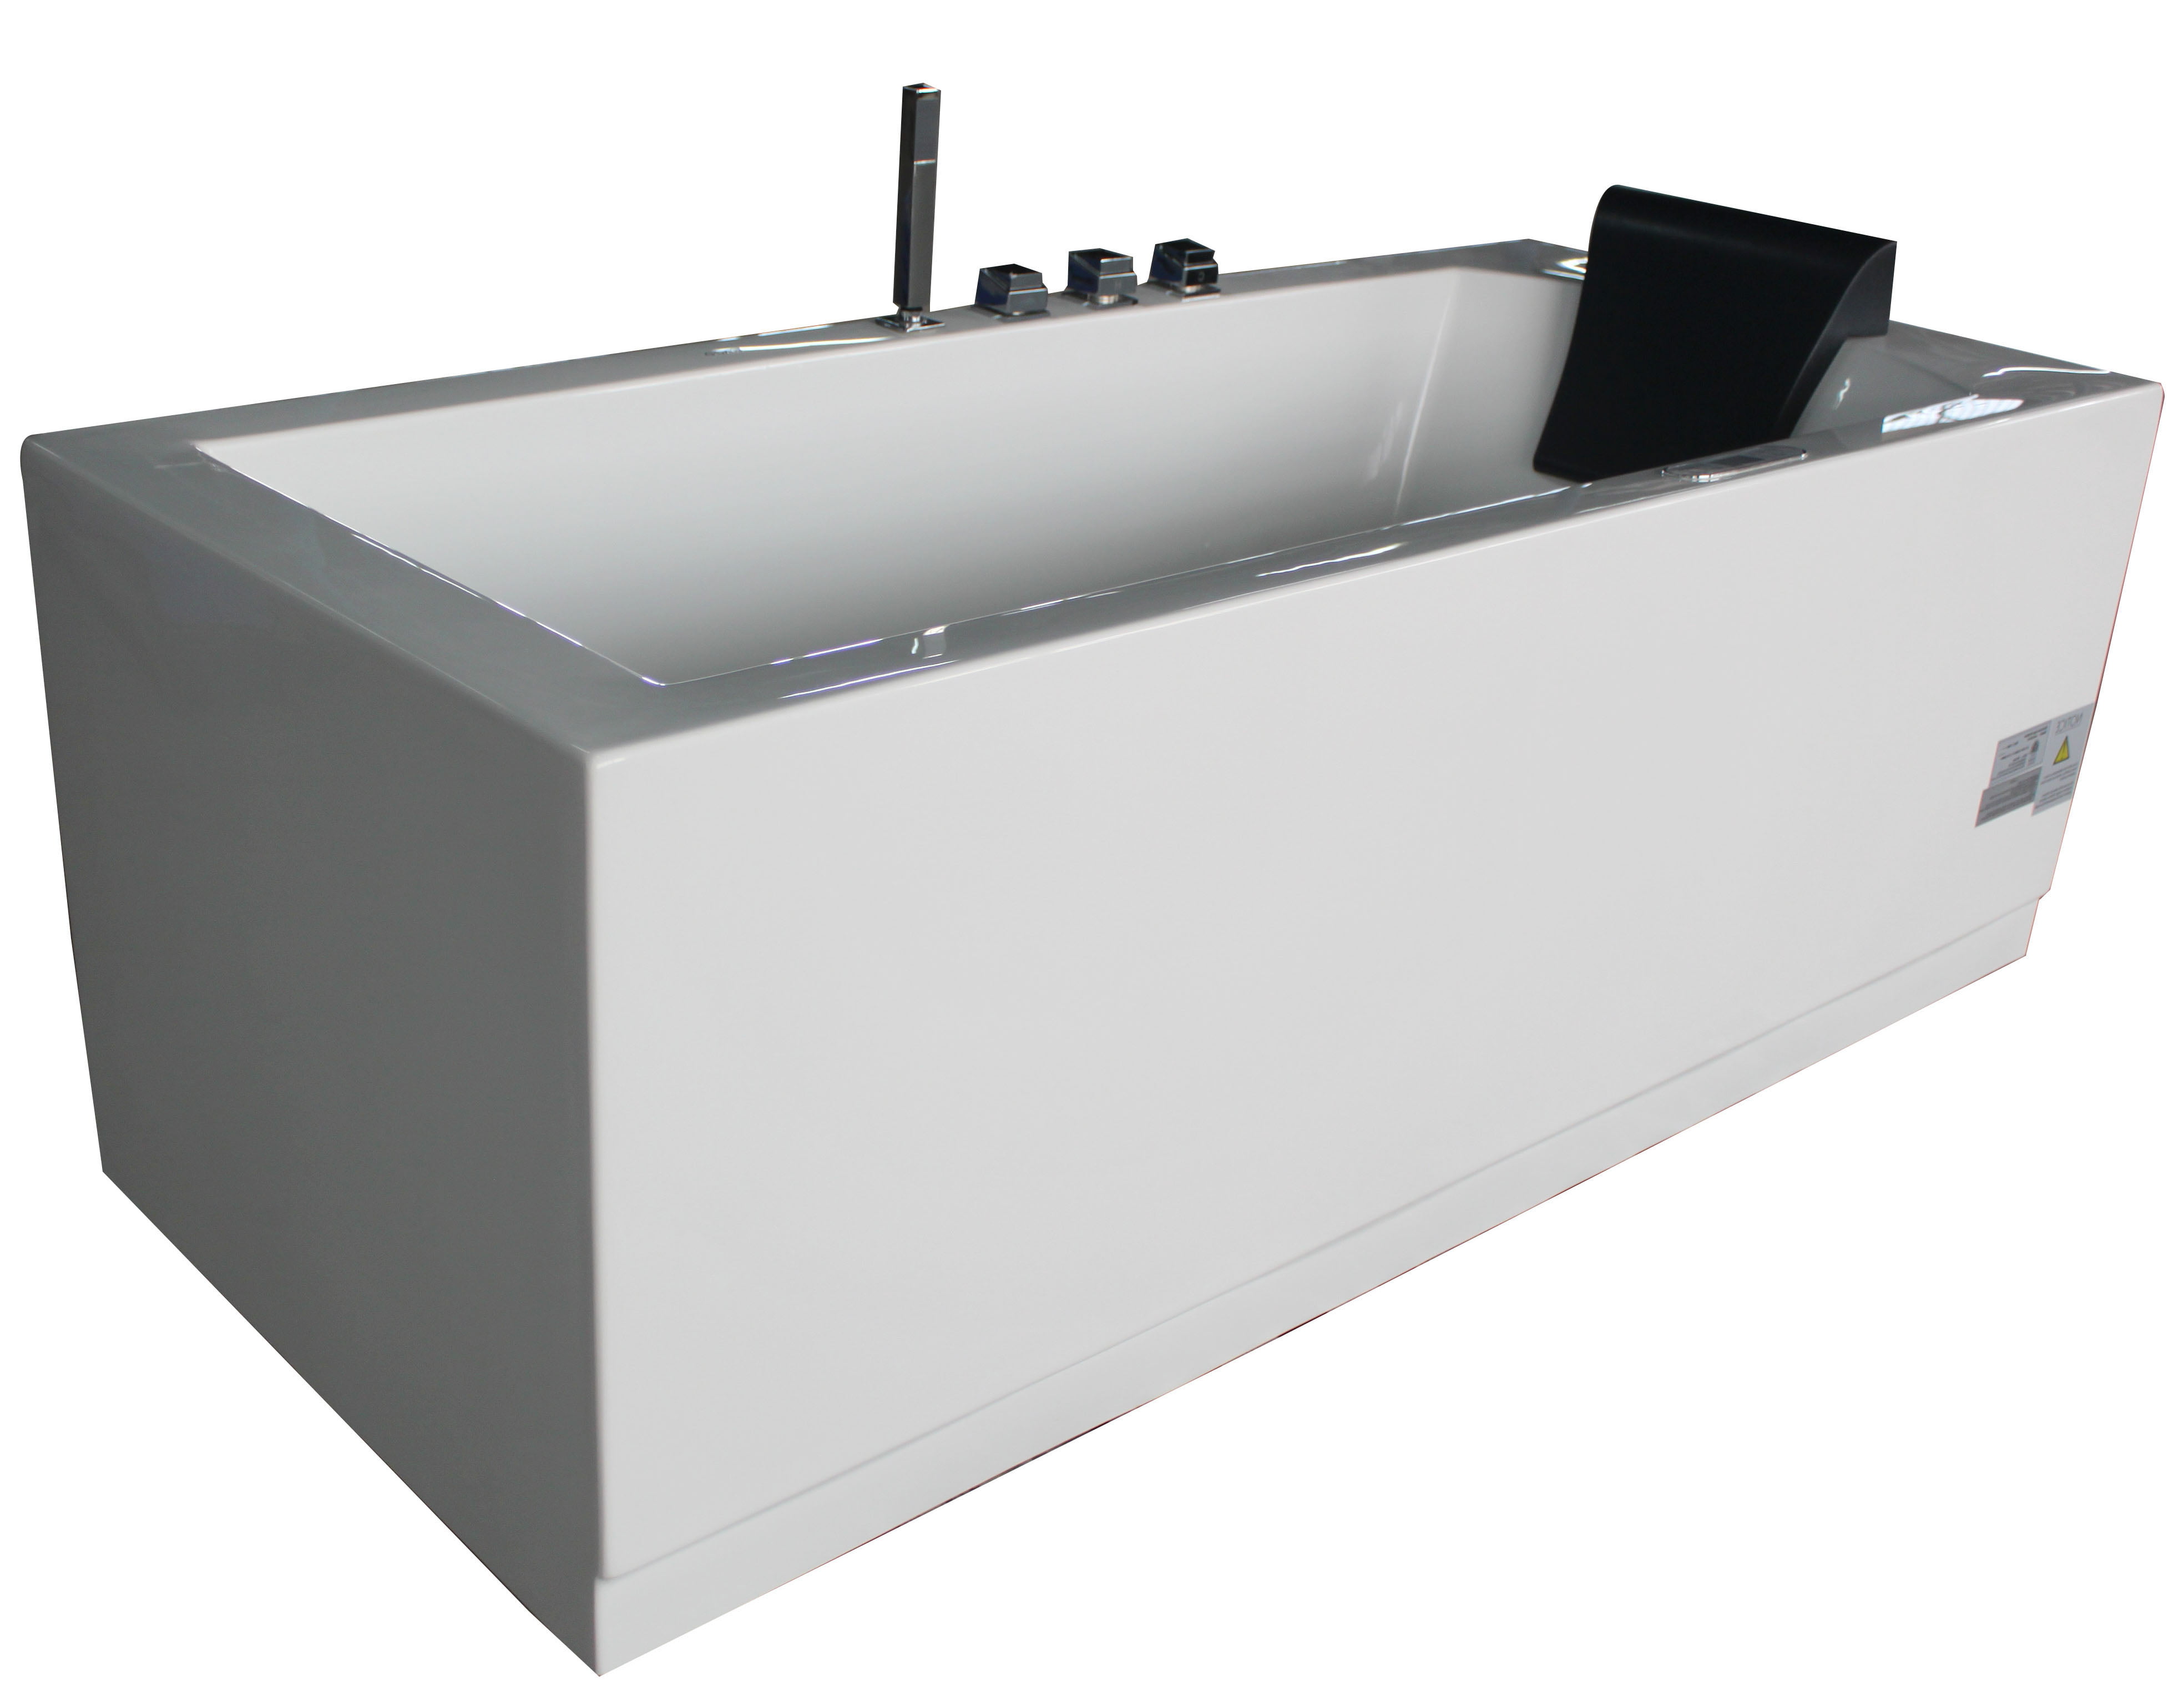 Picture of Eago AM154ETL-L6 6 ft. Acrylic White Rectangular Whirlpool Tub with Fixtures - Left